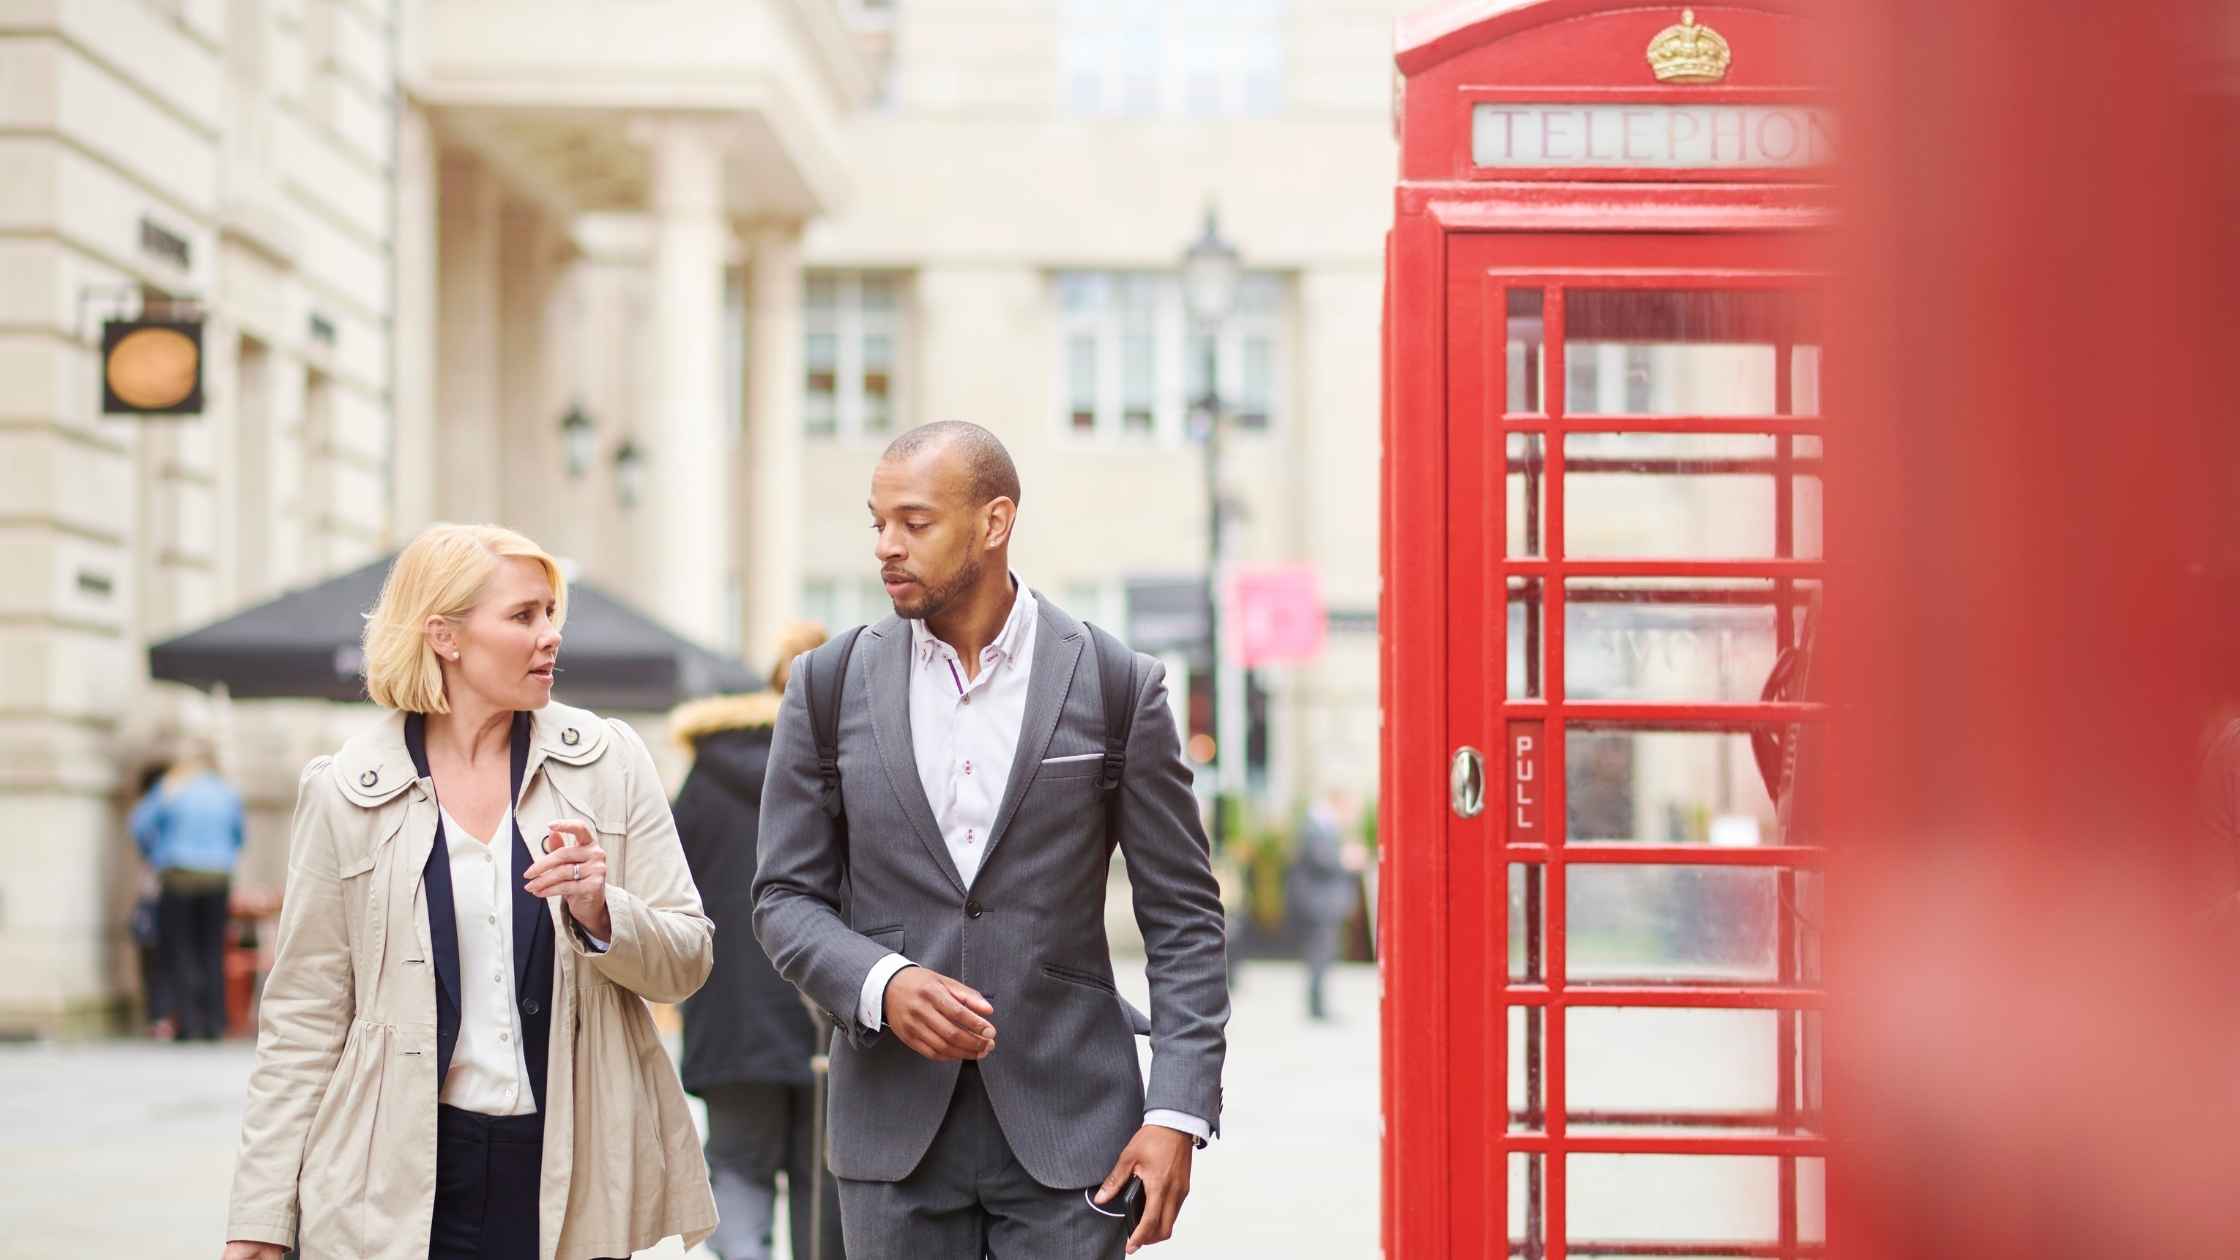 Smiling man and woman walking past a red UK public telephone box